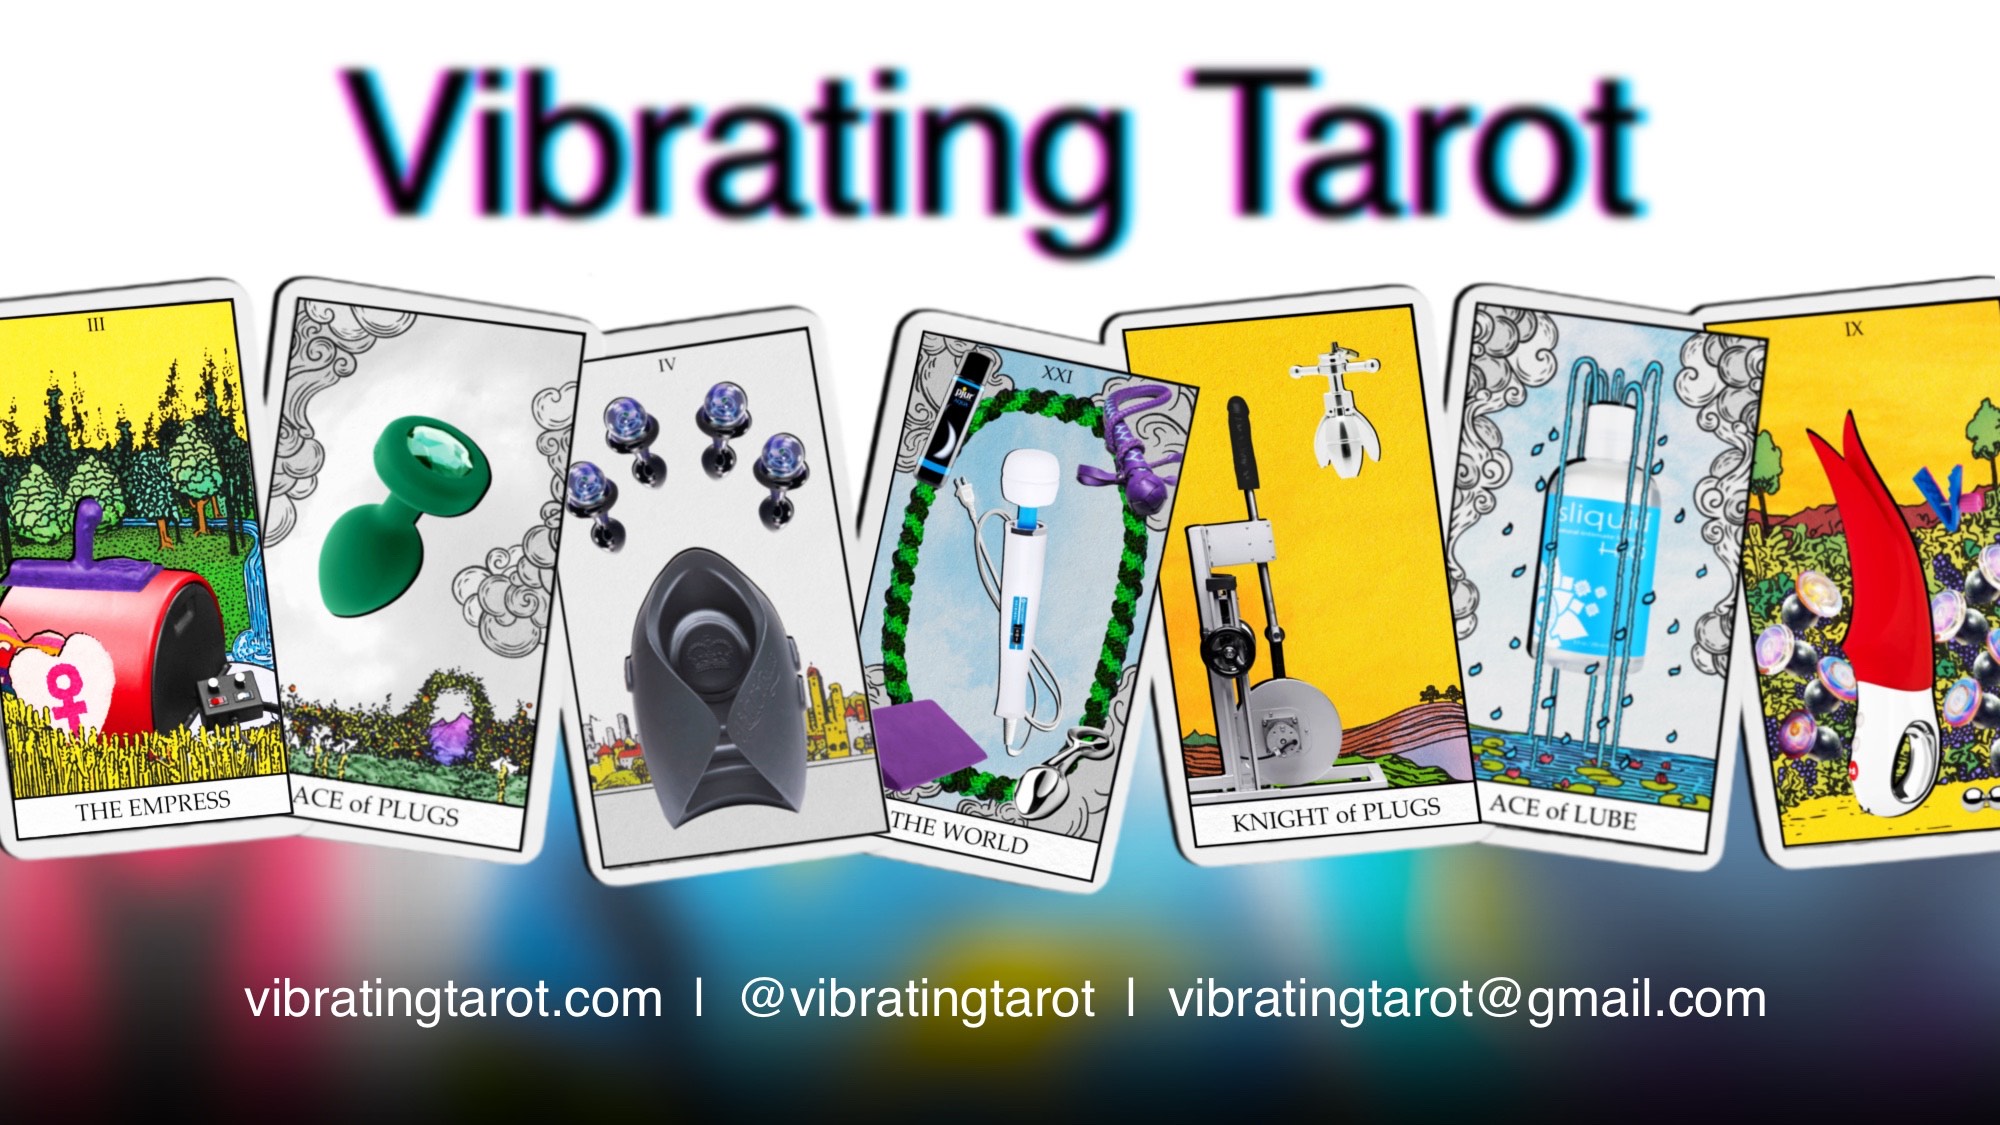 The Vibrating Tarot deck card collection designed by Frank Lawrence.